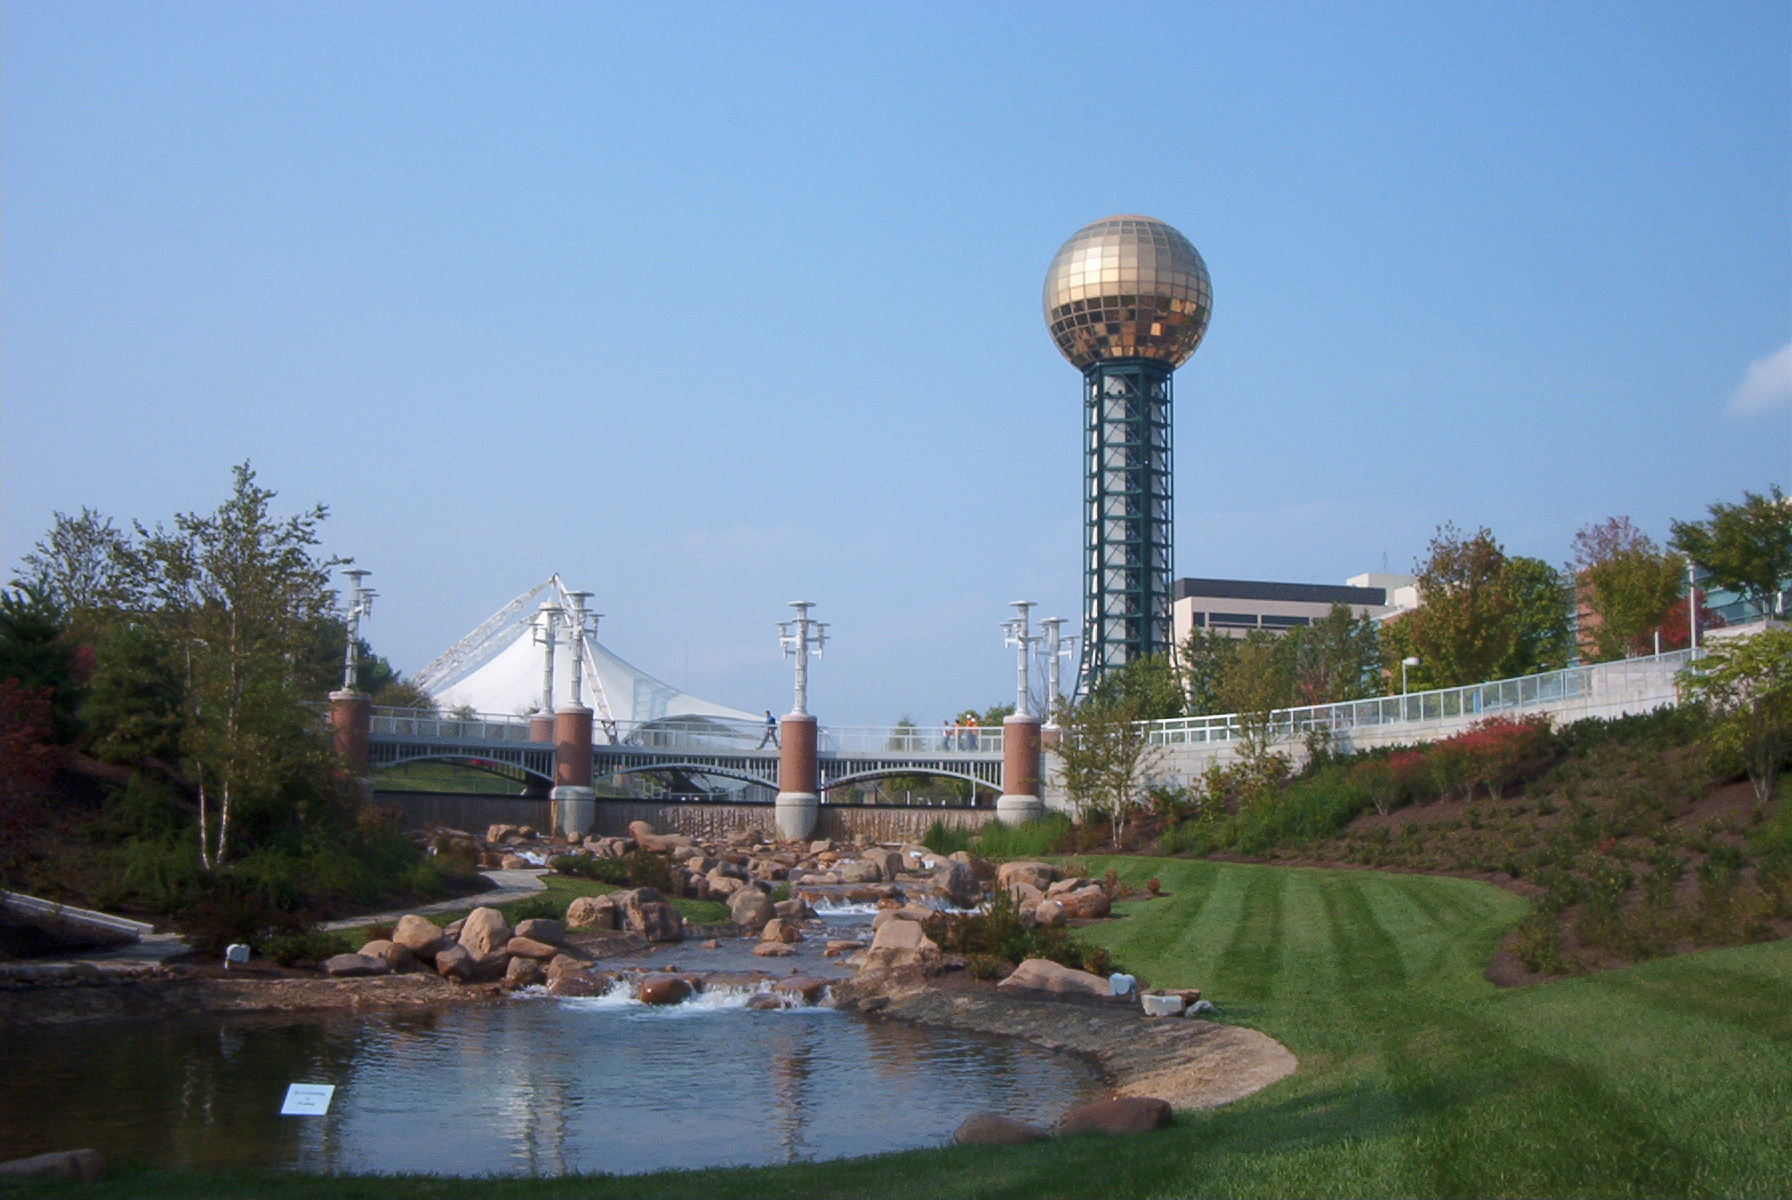 The Sunsphere at the center of the Fair